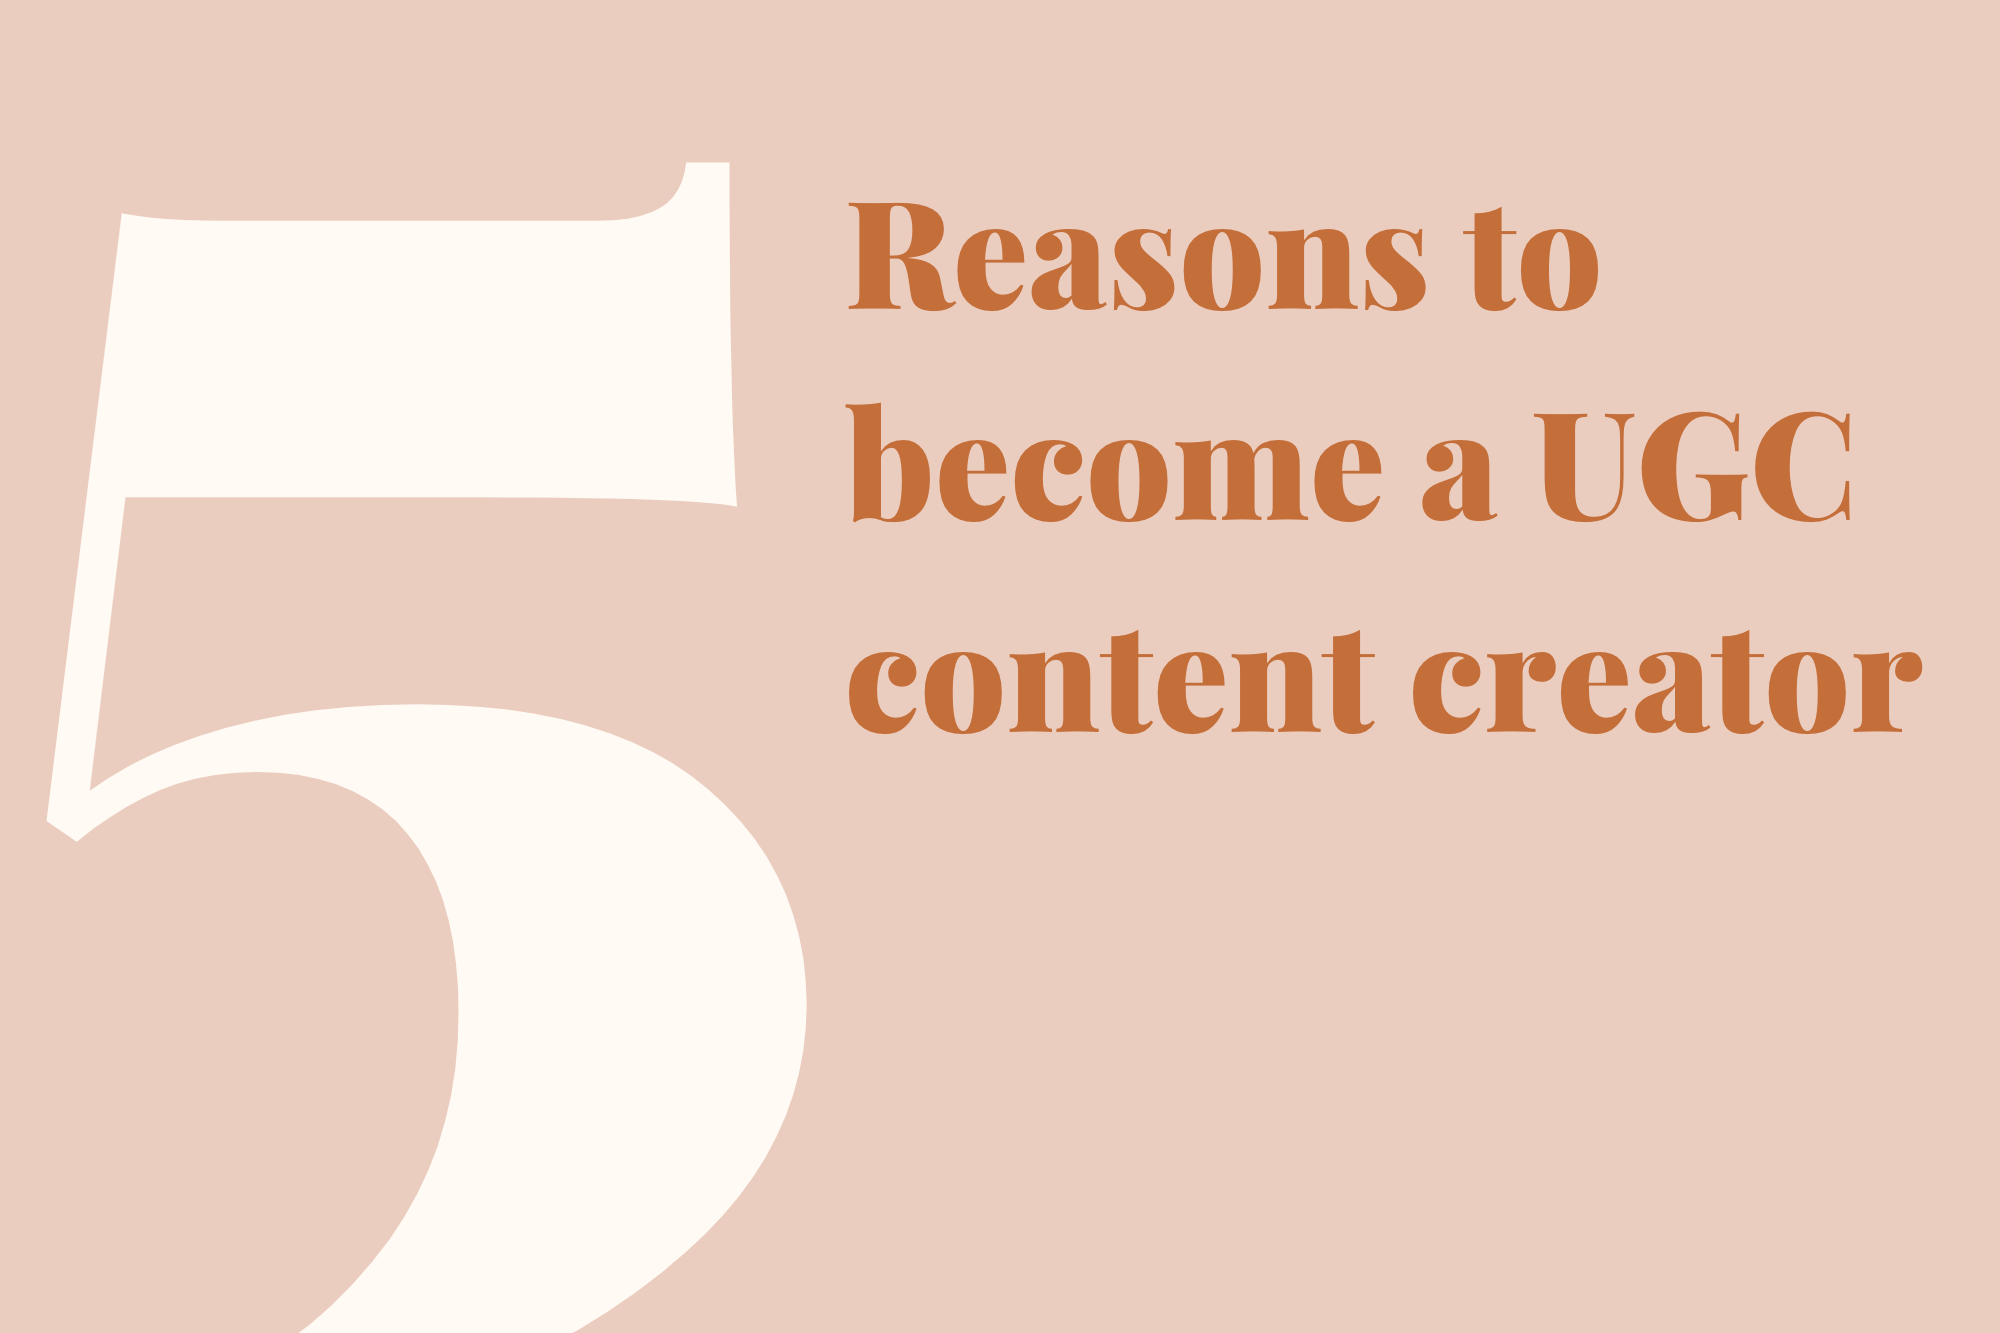 5 reasons to become an UGC content creator